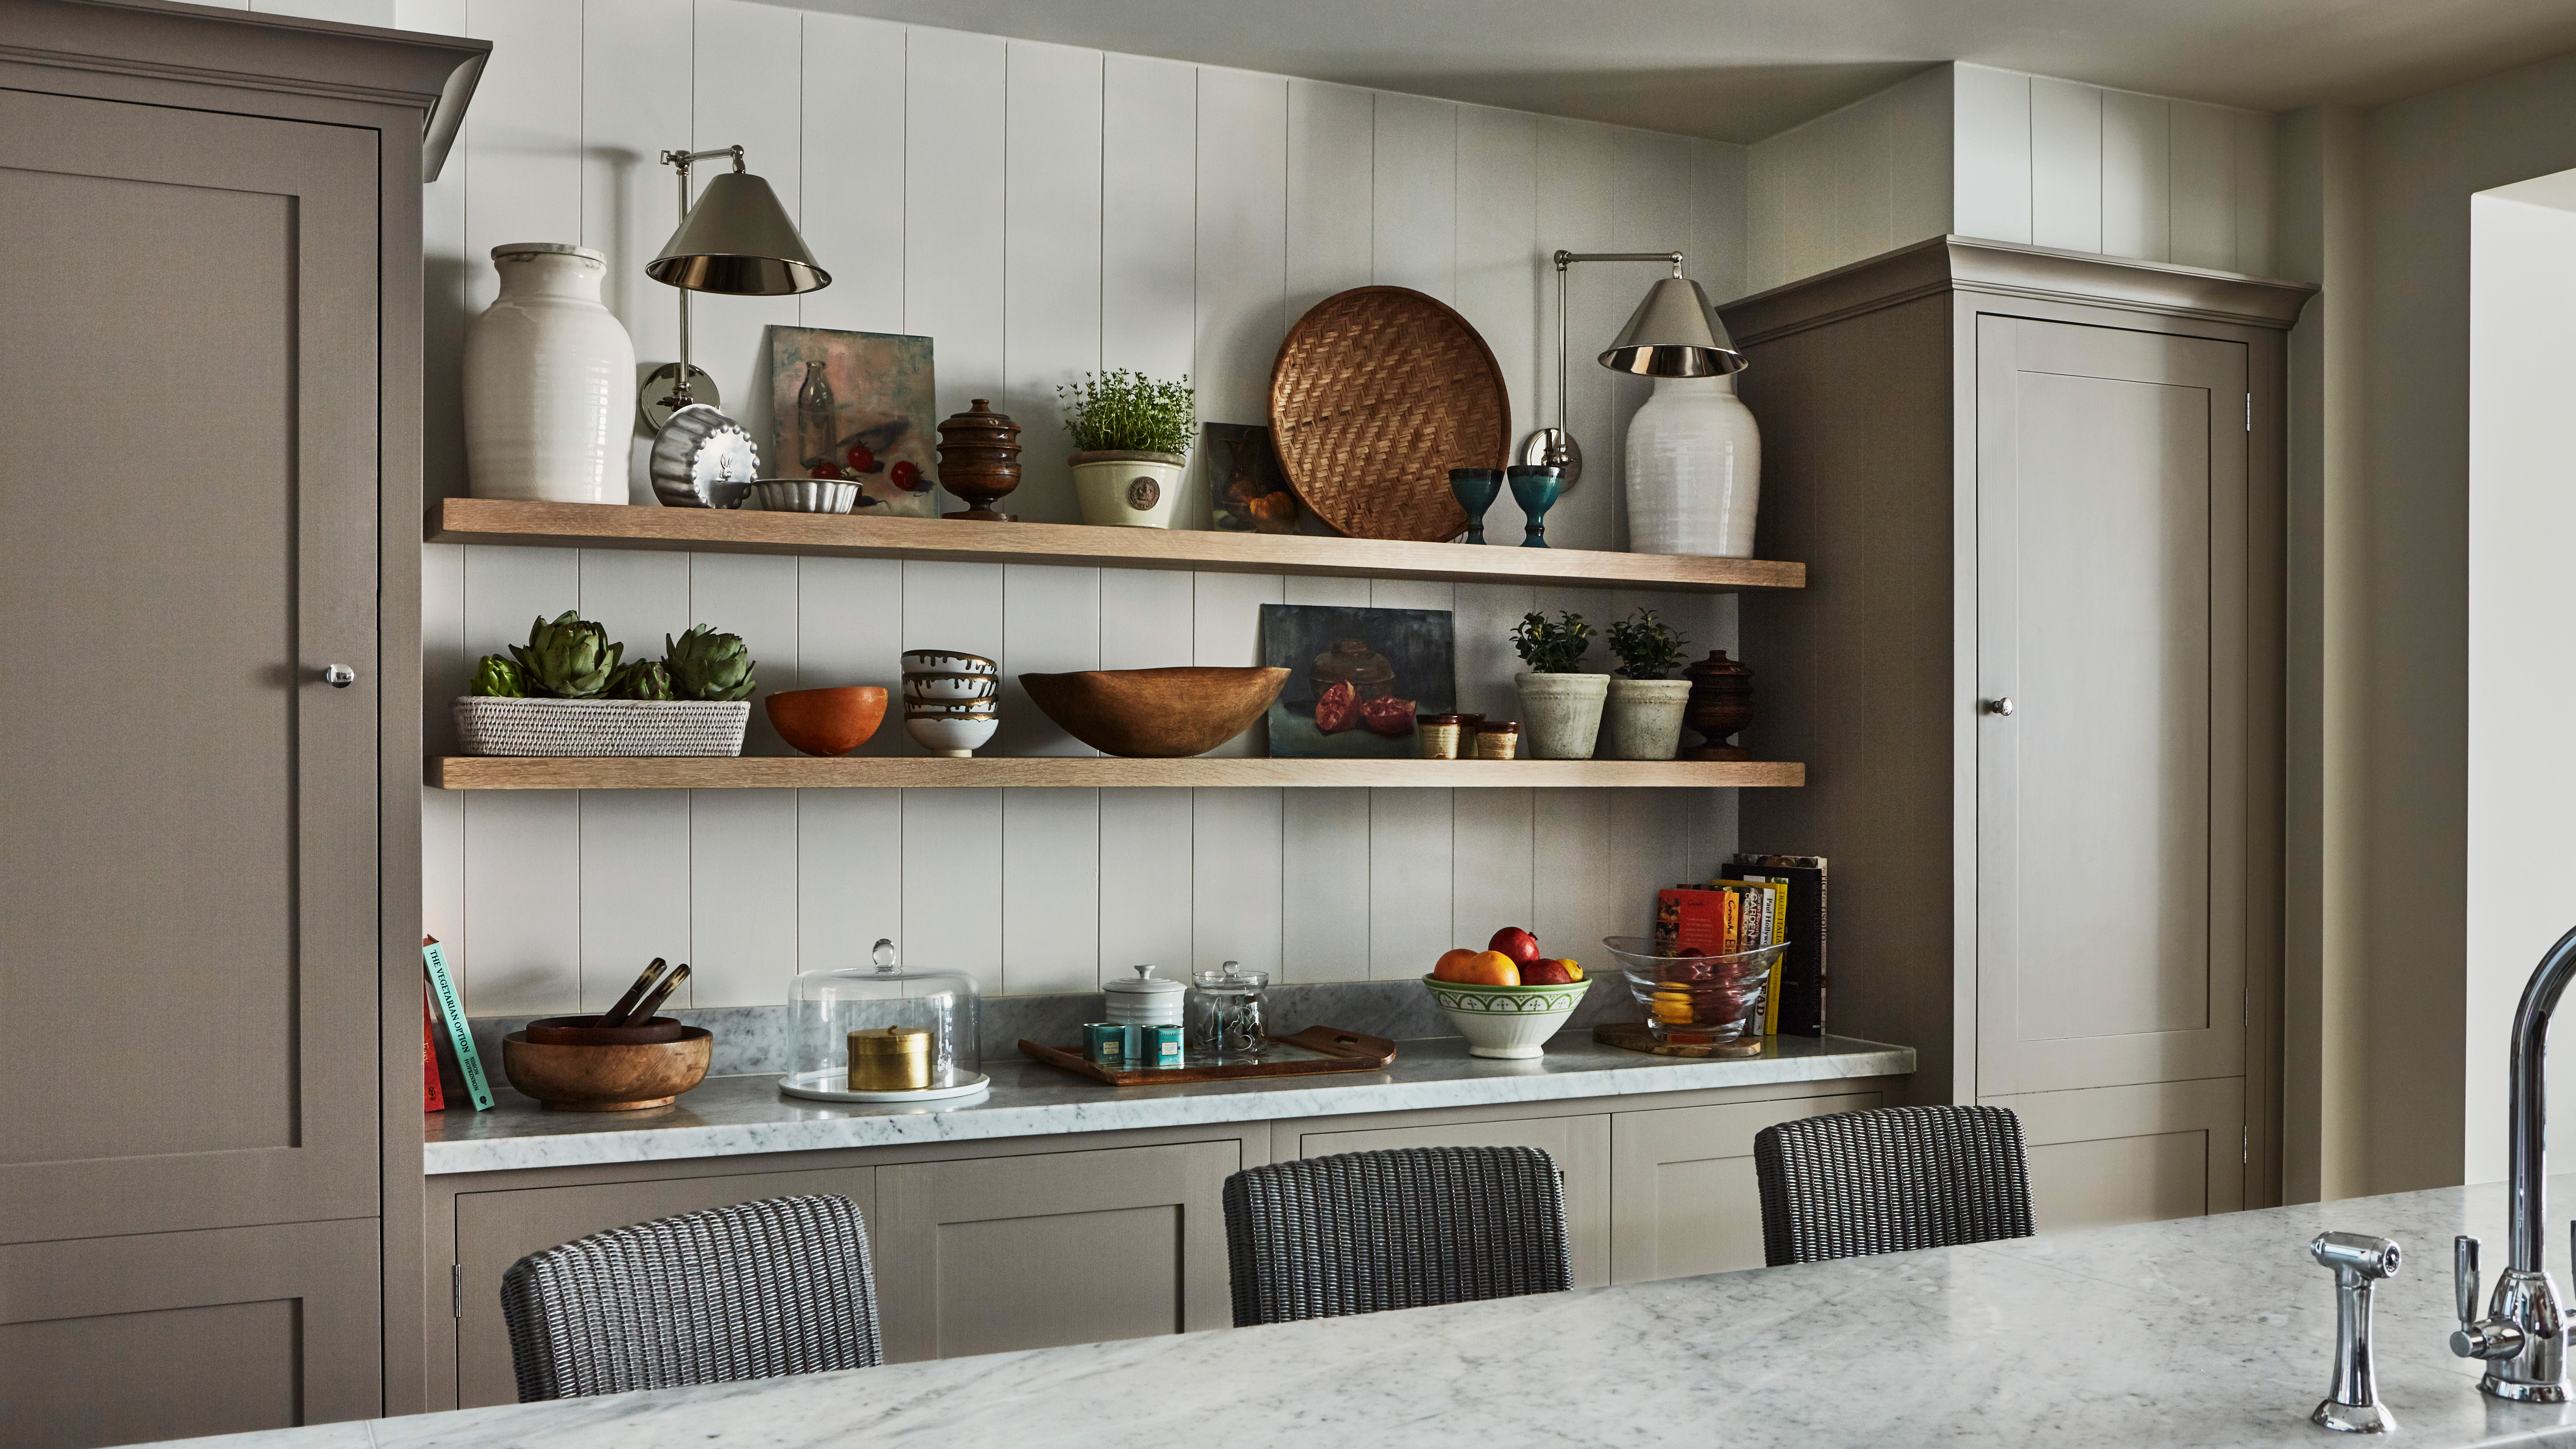 Kitchen Shelving Ideas 14 Ways To, How To Do Open Shelving In Kitchen